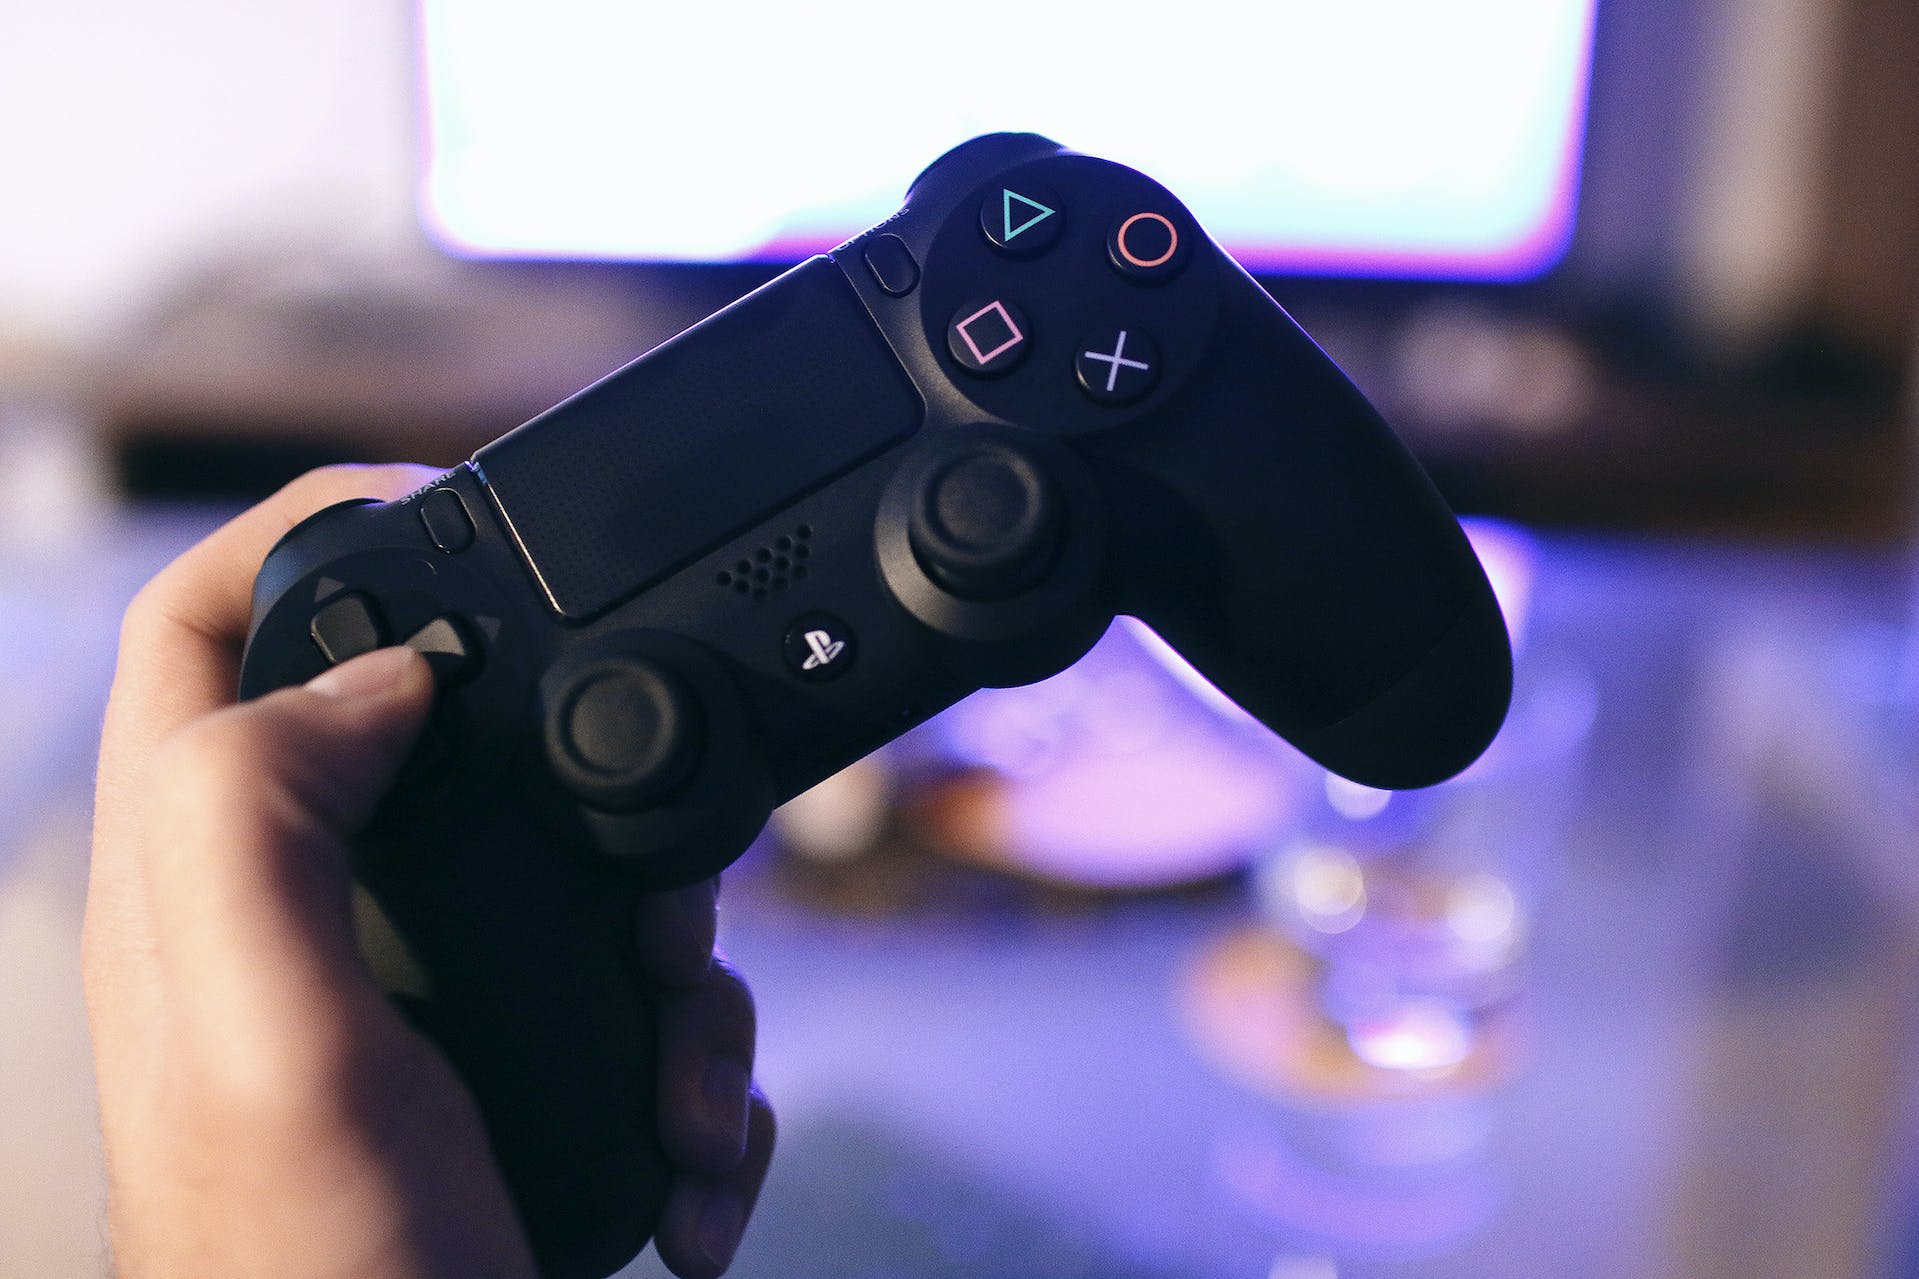 A person holding a gaming controller | Source: Pexels